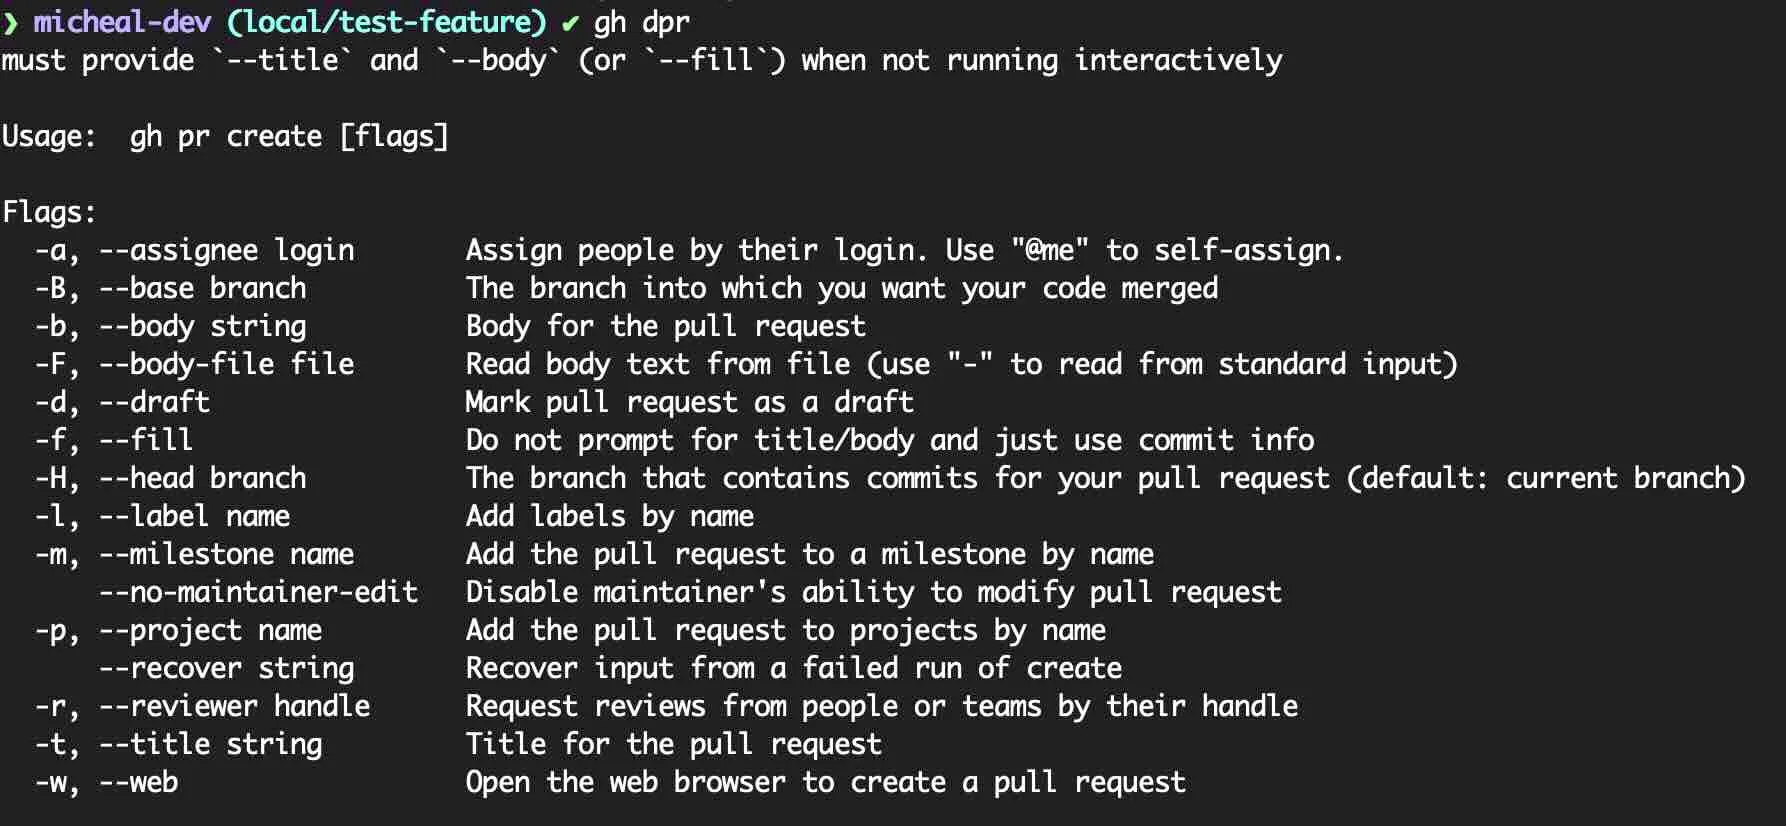 Disable the GH CLI interactive prompts allows for fast updates with preconfigured commands